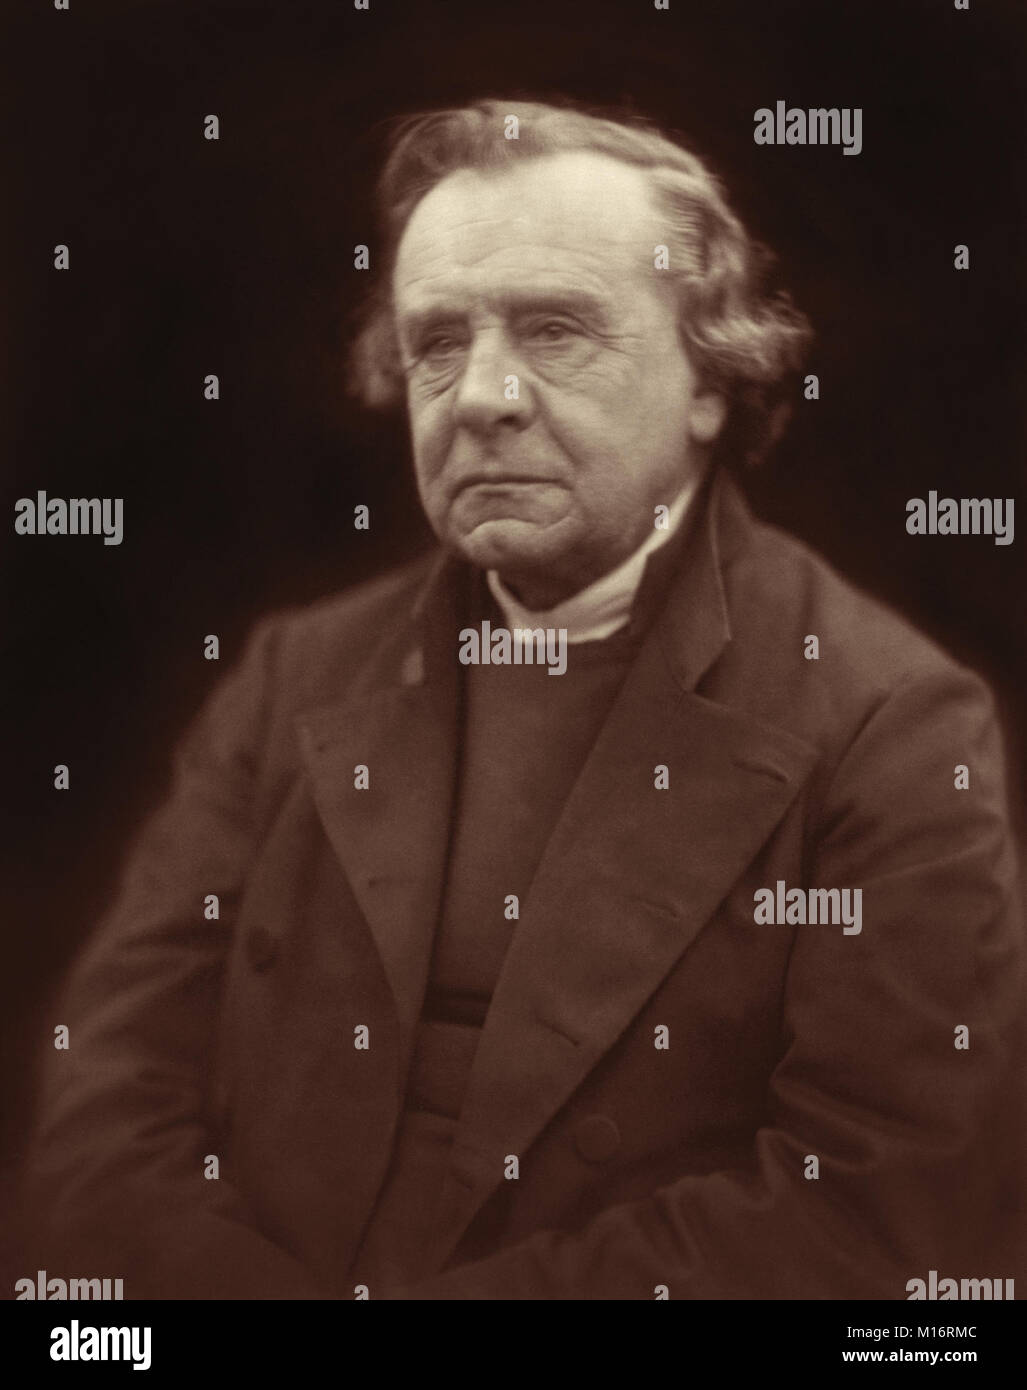 Samuel Wilberforce FRS (1805-1873), Bishop of Oxford and third son of William Wilberforce, was an opponent of Darwin's theory of evolution by natural selection and famously debated Thomas Henry Huxley on the subject at the Oxford University Museum of Natural History in 1860. (Restored and enhanced image from photographic print by Julia Margaret Cameron, 1872.) Stock Photo